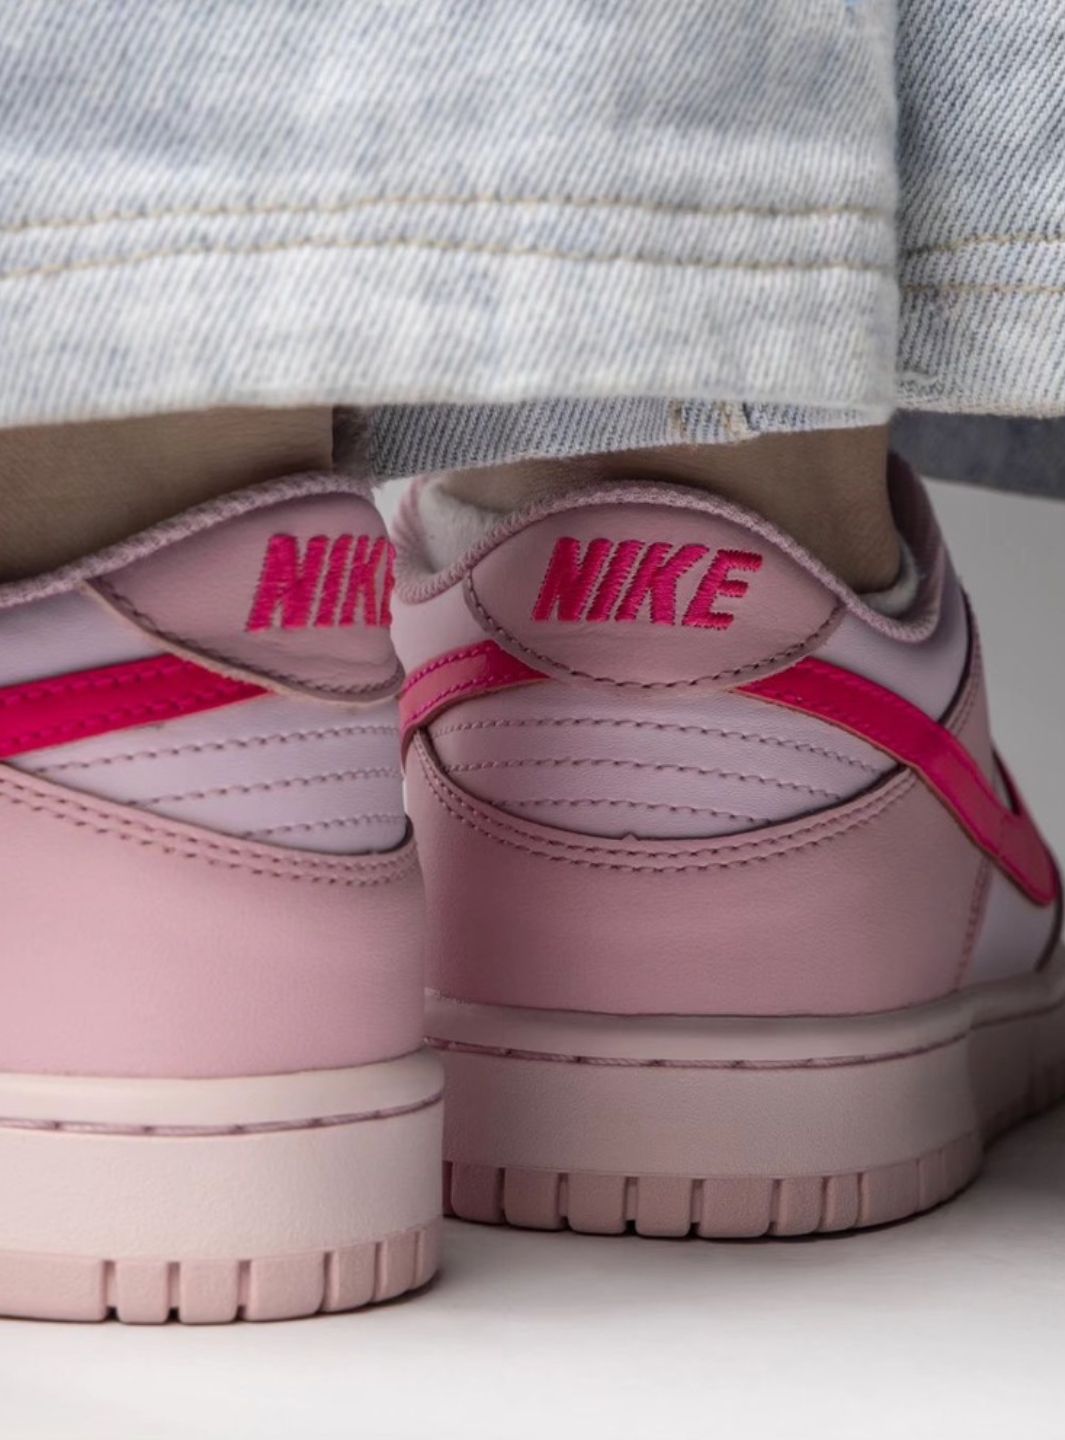 Nike Dunk Low Triple Pink - DH9765-600 | ResellZone